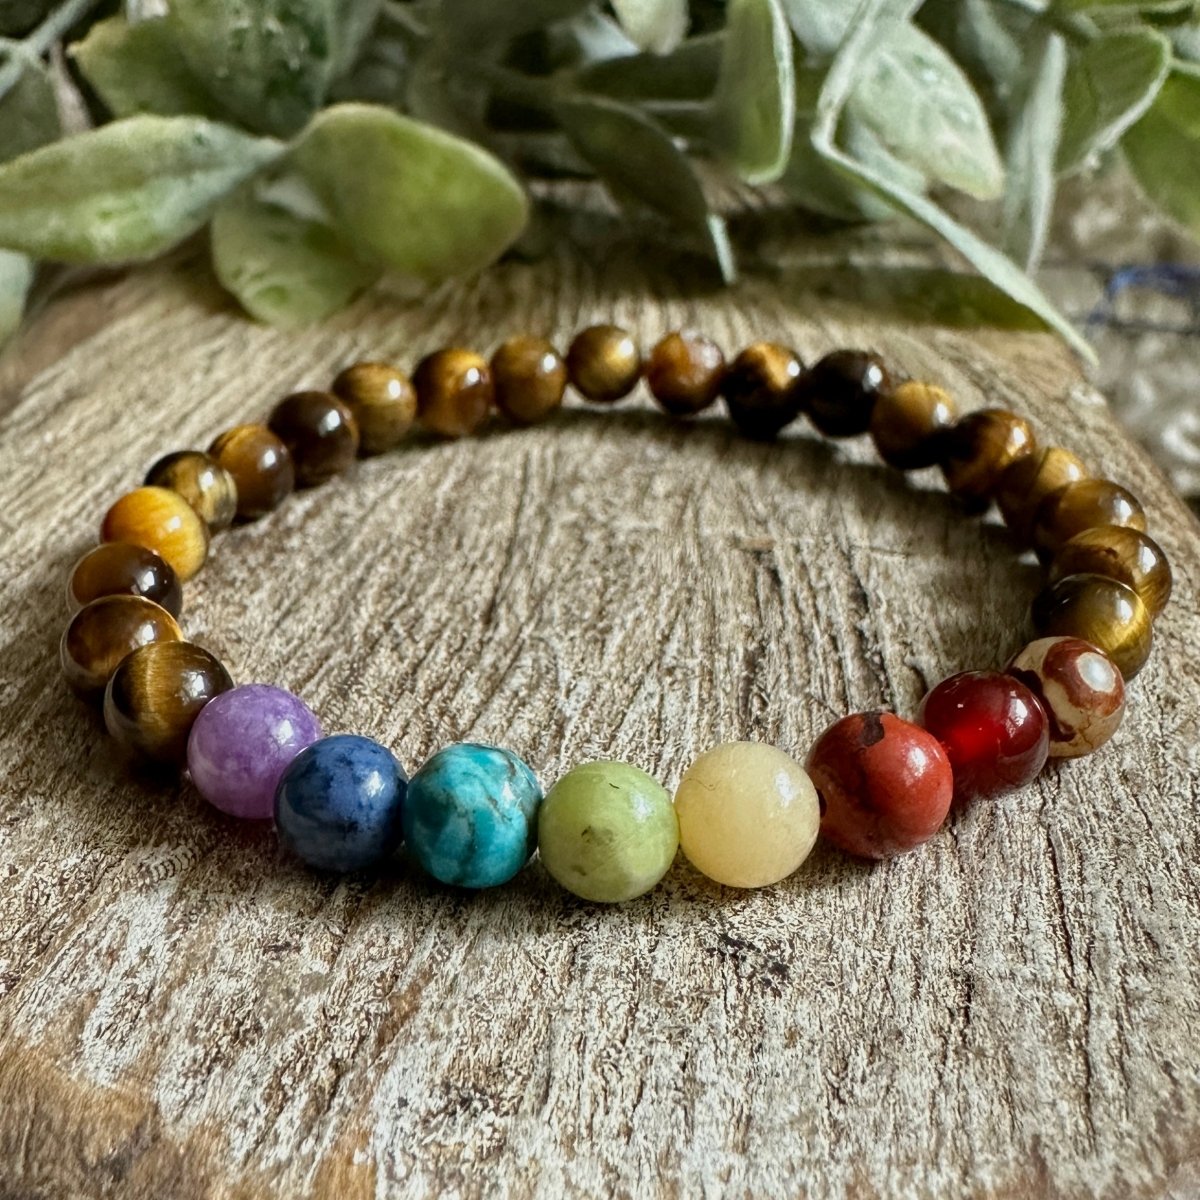 Buy 7 Chakra Bracelet With Real Stones, Chakra Crystals Bracelets for  Women, Rainbow Chakra Jewelry, Gifts for Her Online in India - Etsy